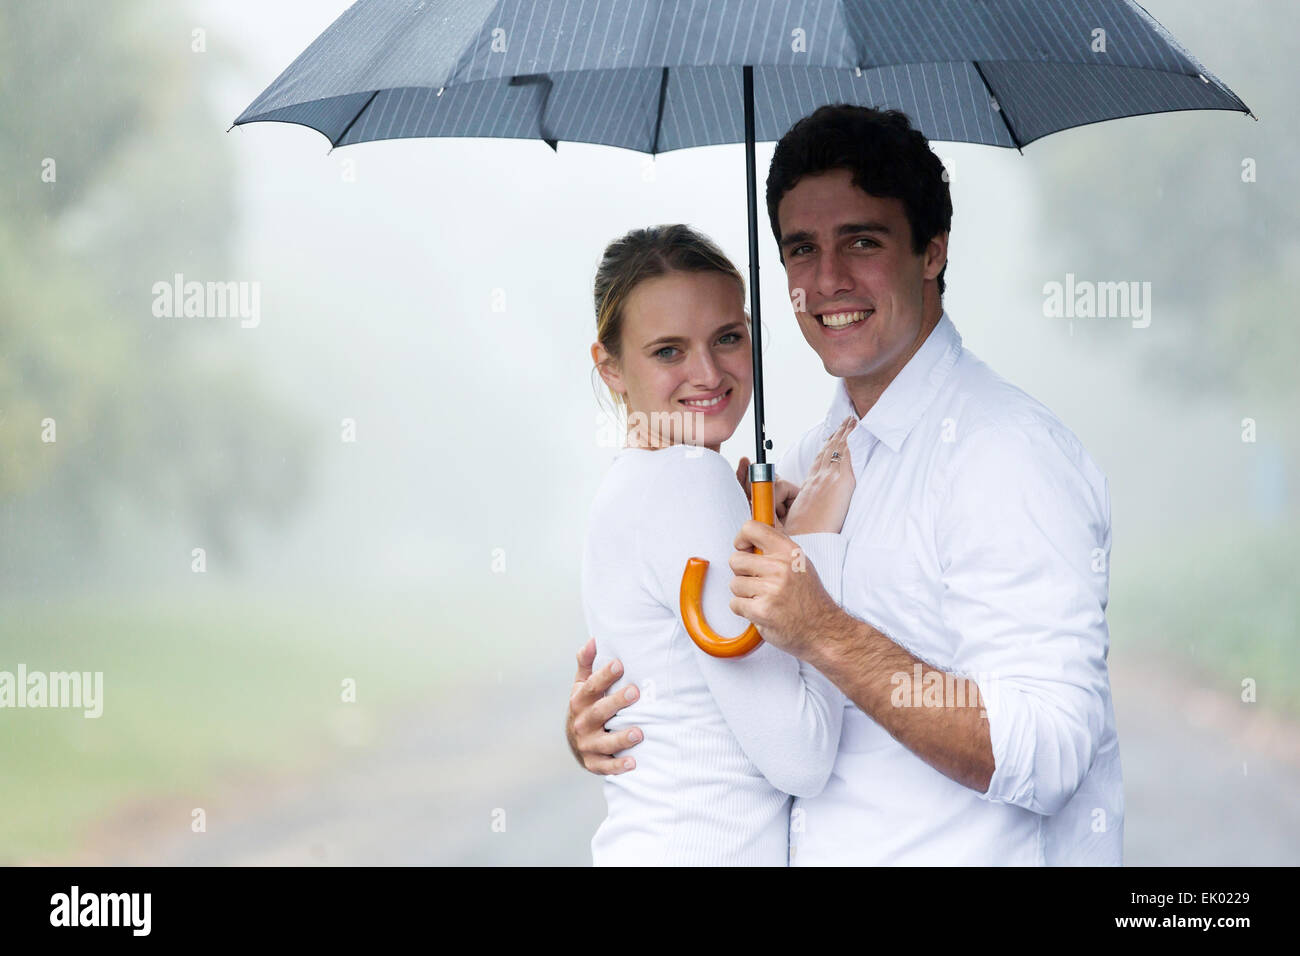 happy young couple holding an umbrella in the rain Stock Photo